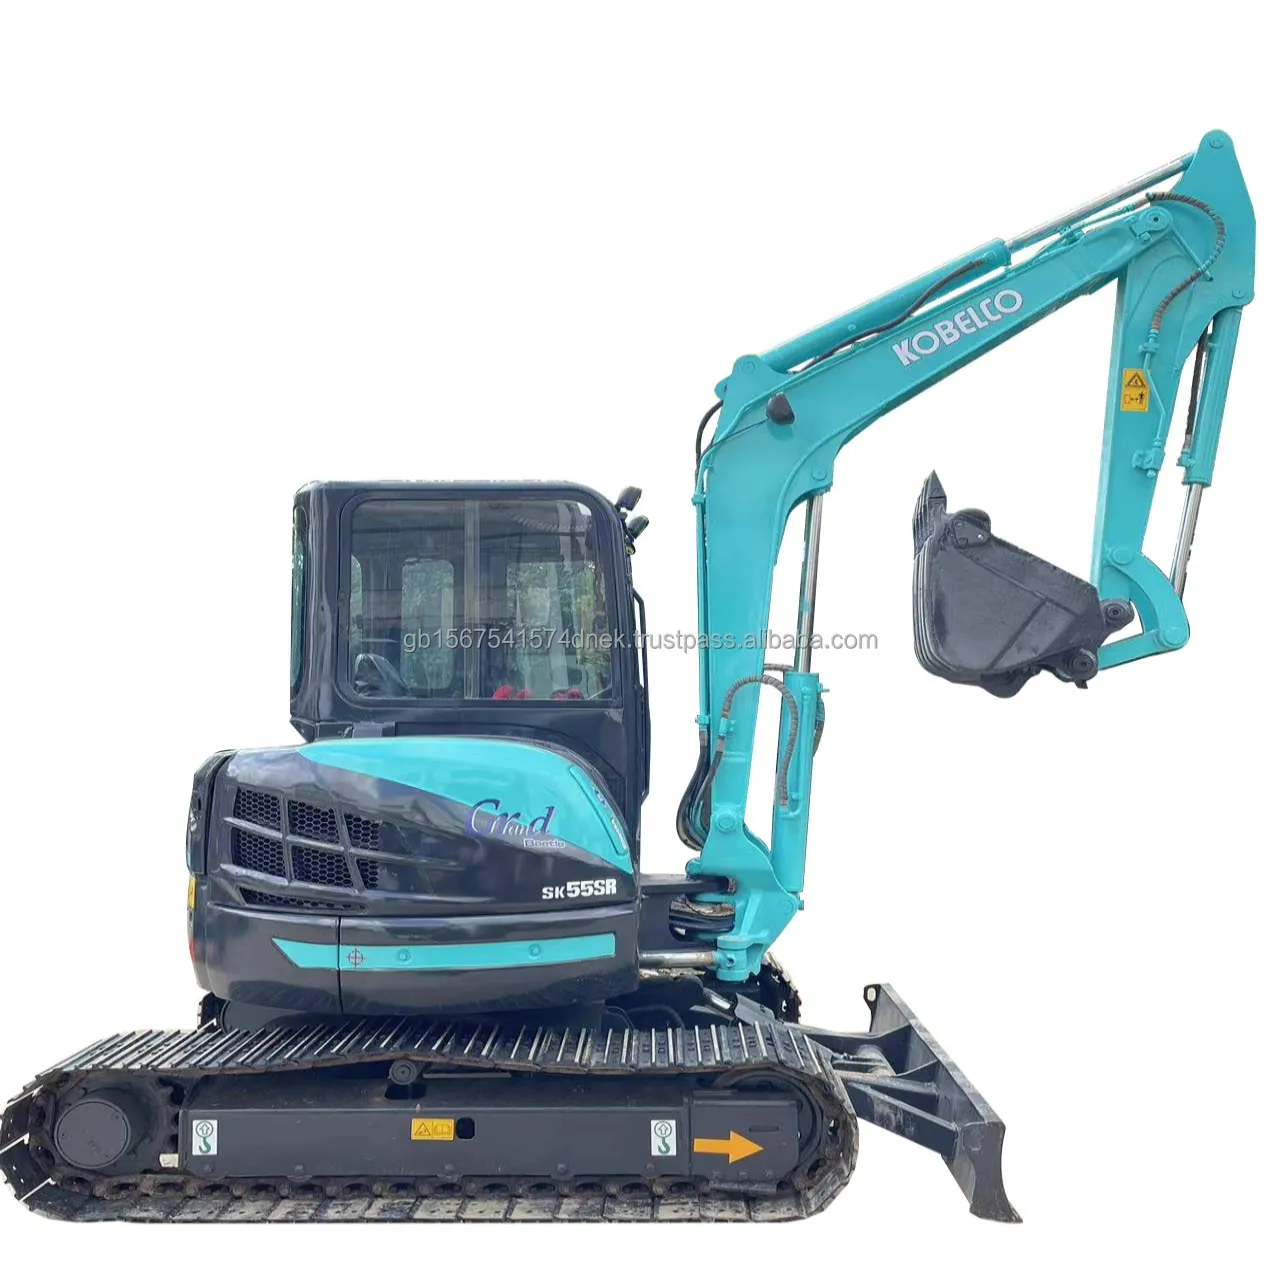 Kobelco SK55 in good condition durable high quality affordable price Hitachi Caterpillar sells second-hand excavators